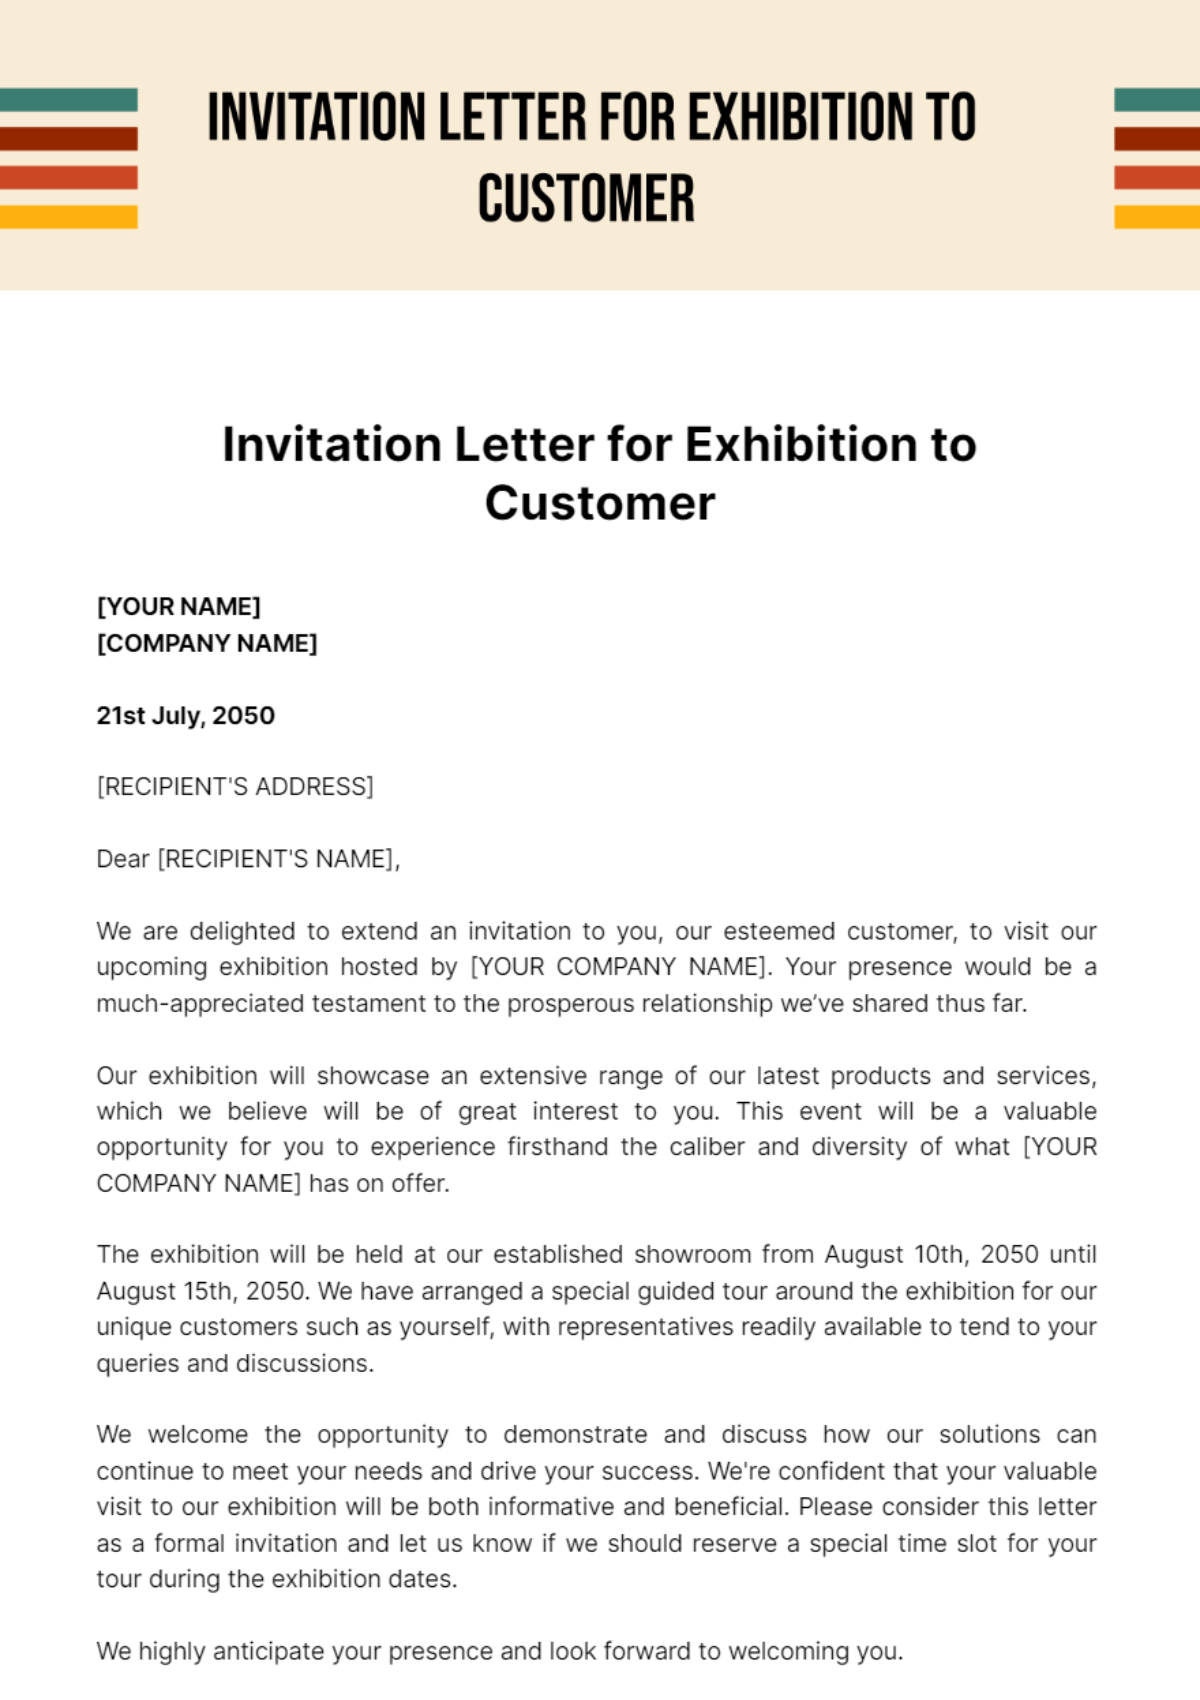 Free Invitation Letter for Exhibition to Customer Template